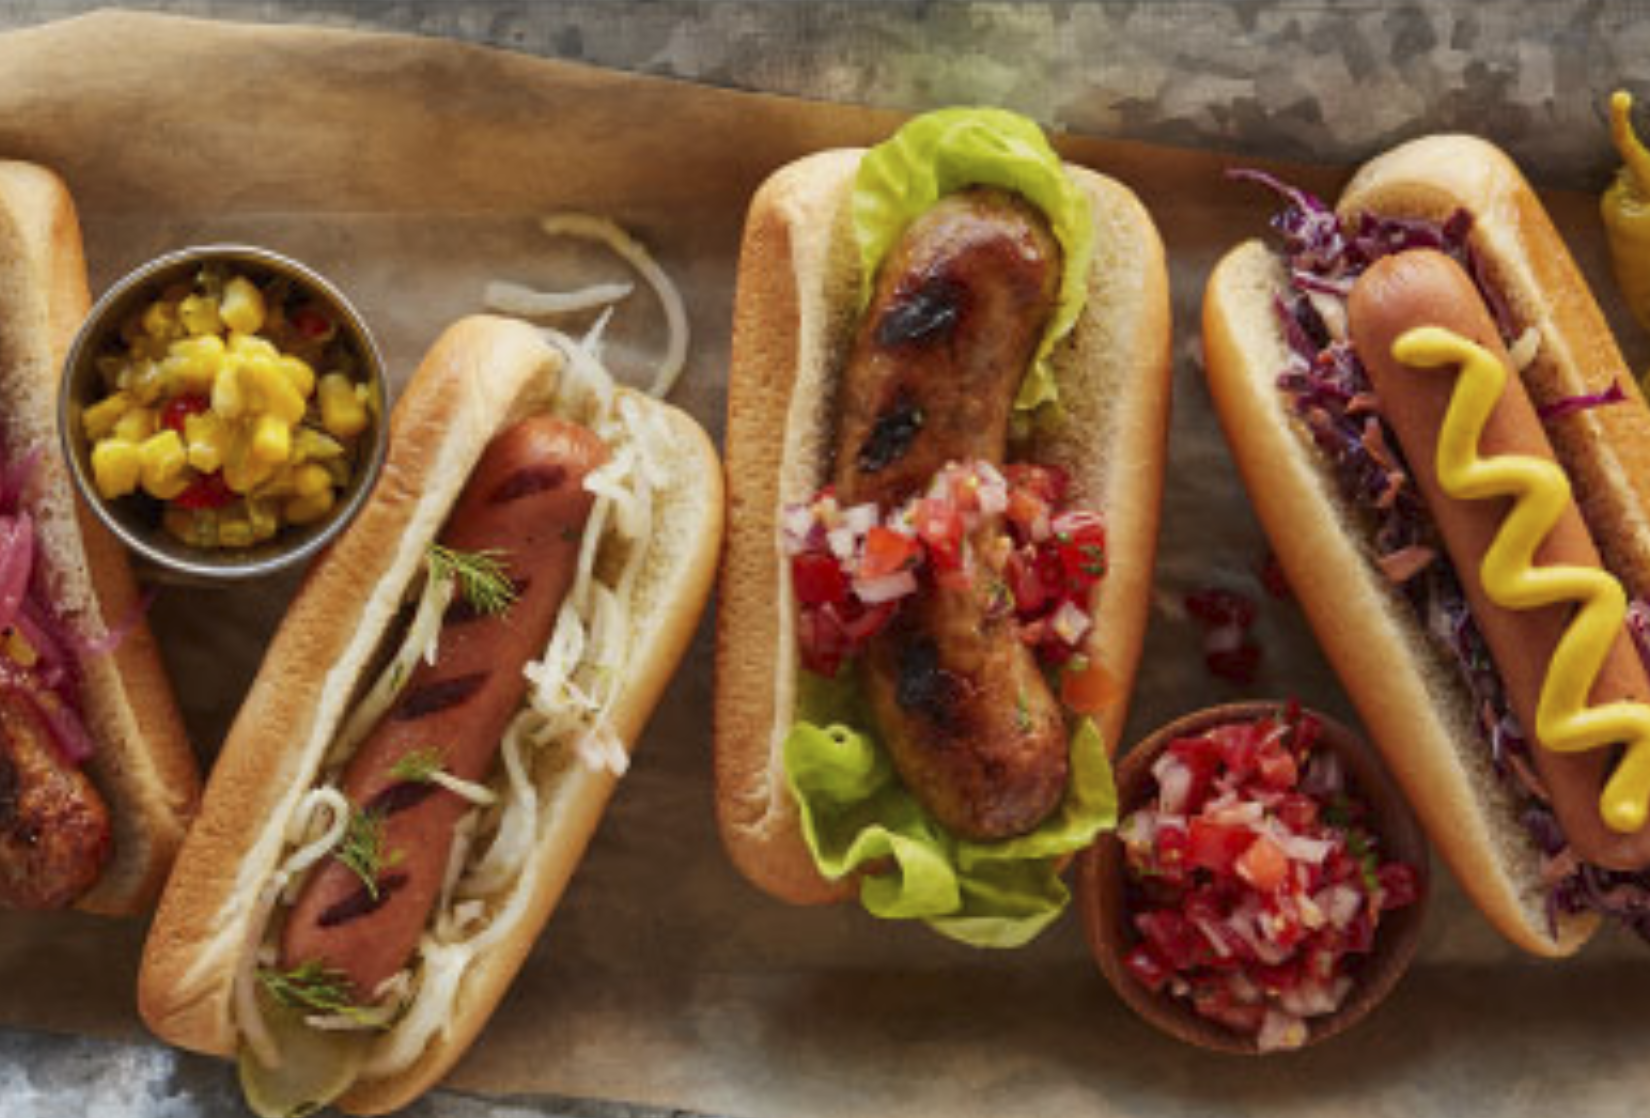 Hot dogs in buns with different toppings like lettuce, rosemary, mustard, purple cabbage, corn, and more. These are, um, creative options.